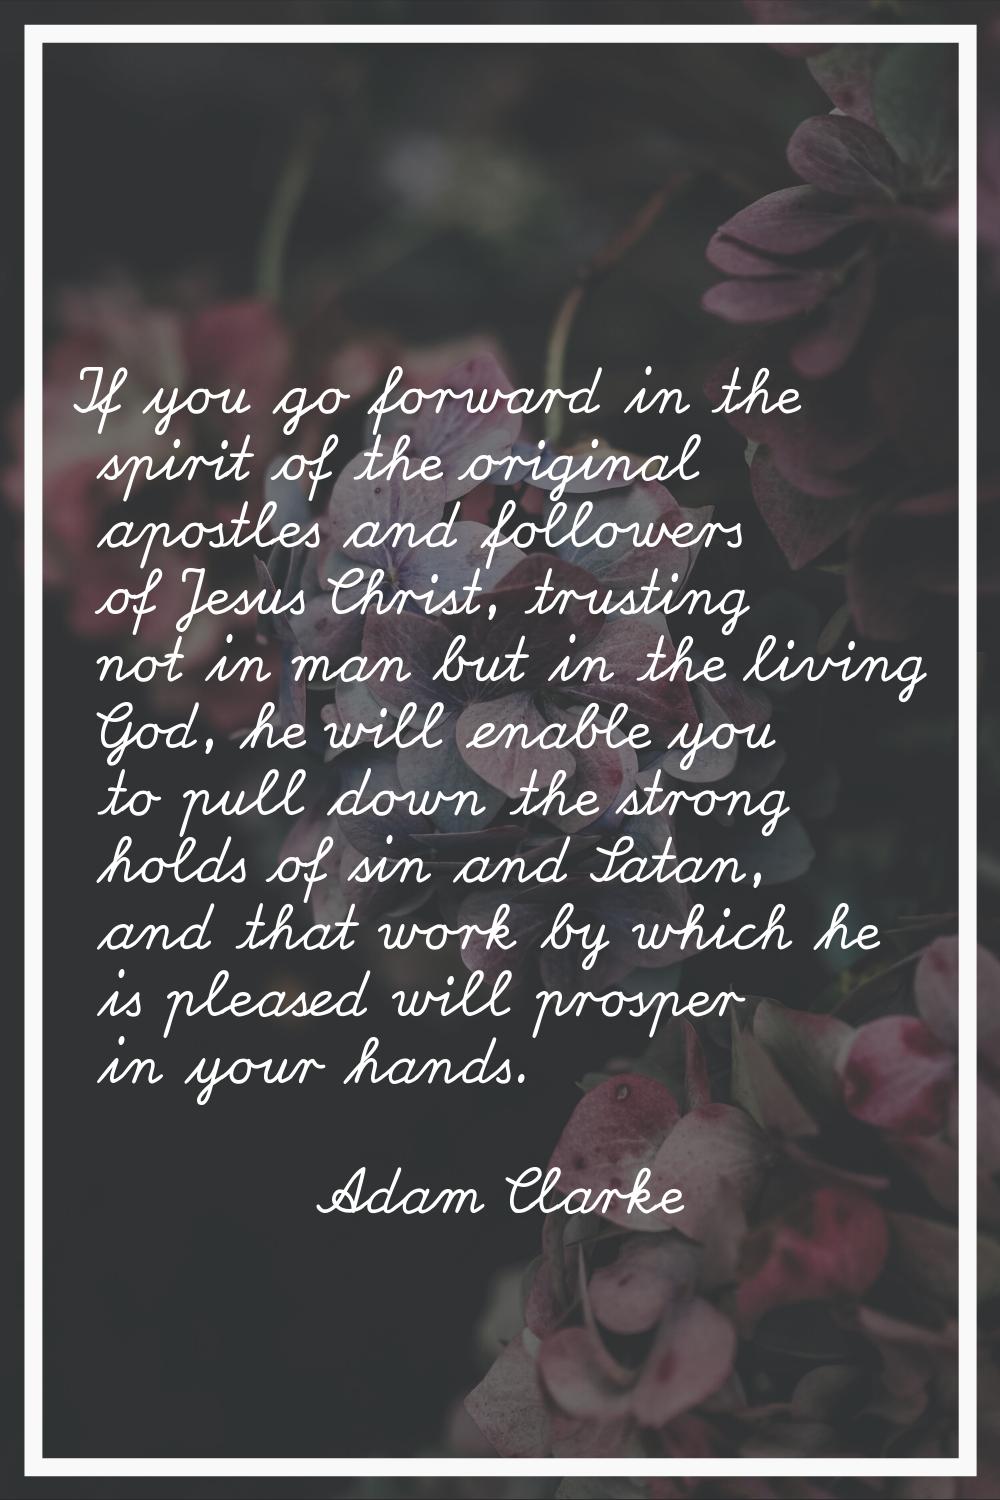 If you go forward in the spirit of the original apostles and followers of Jesus Christ, trusting no